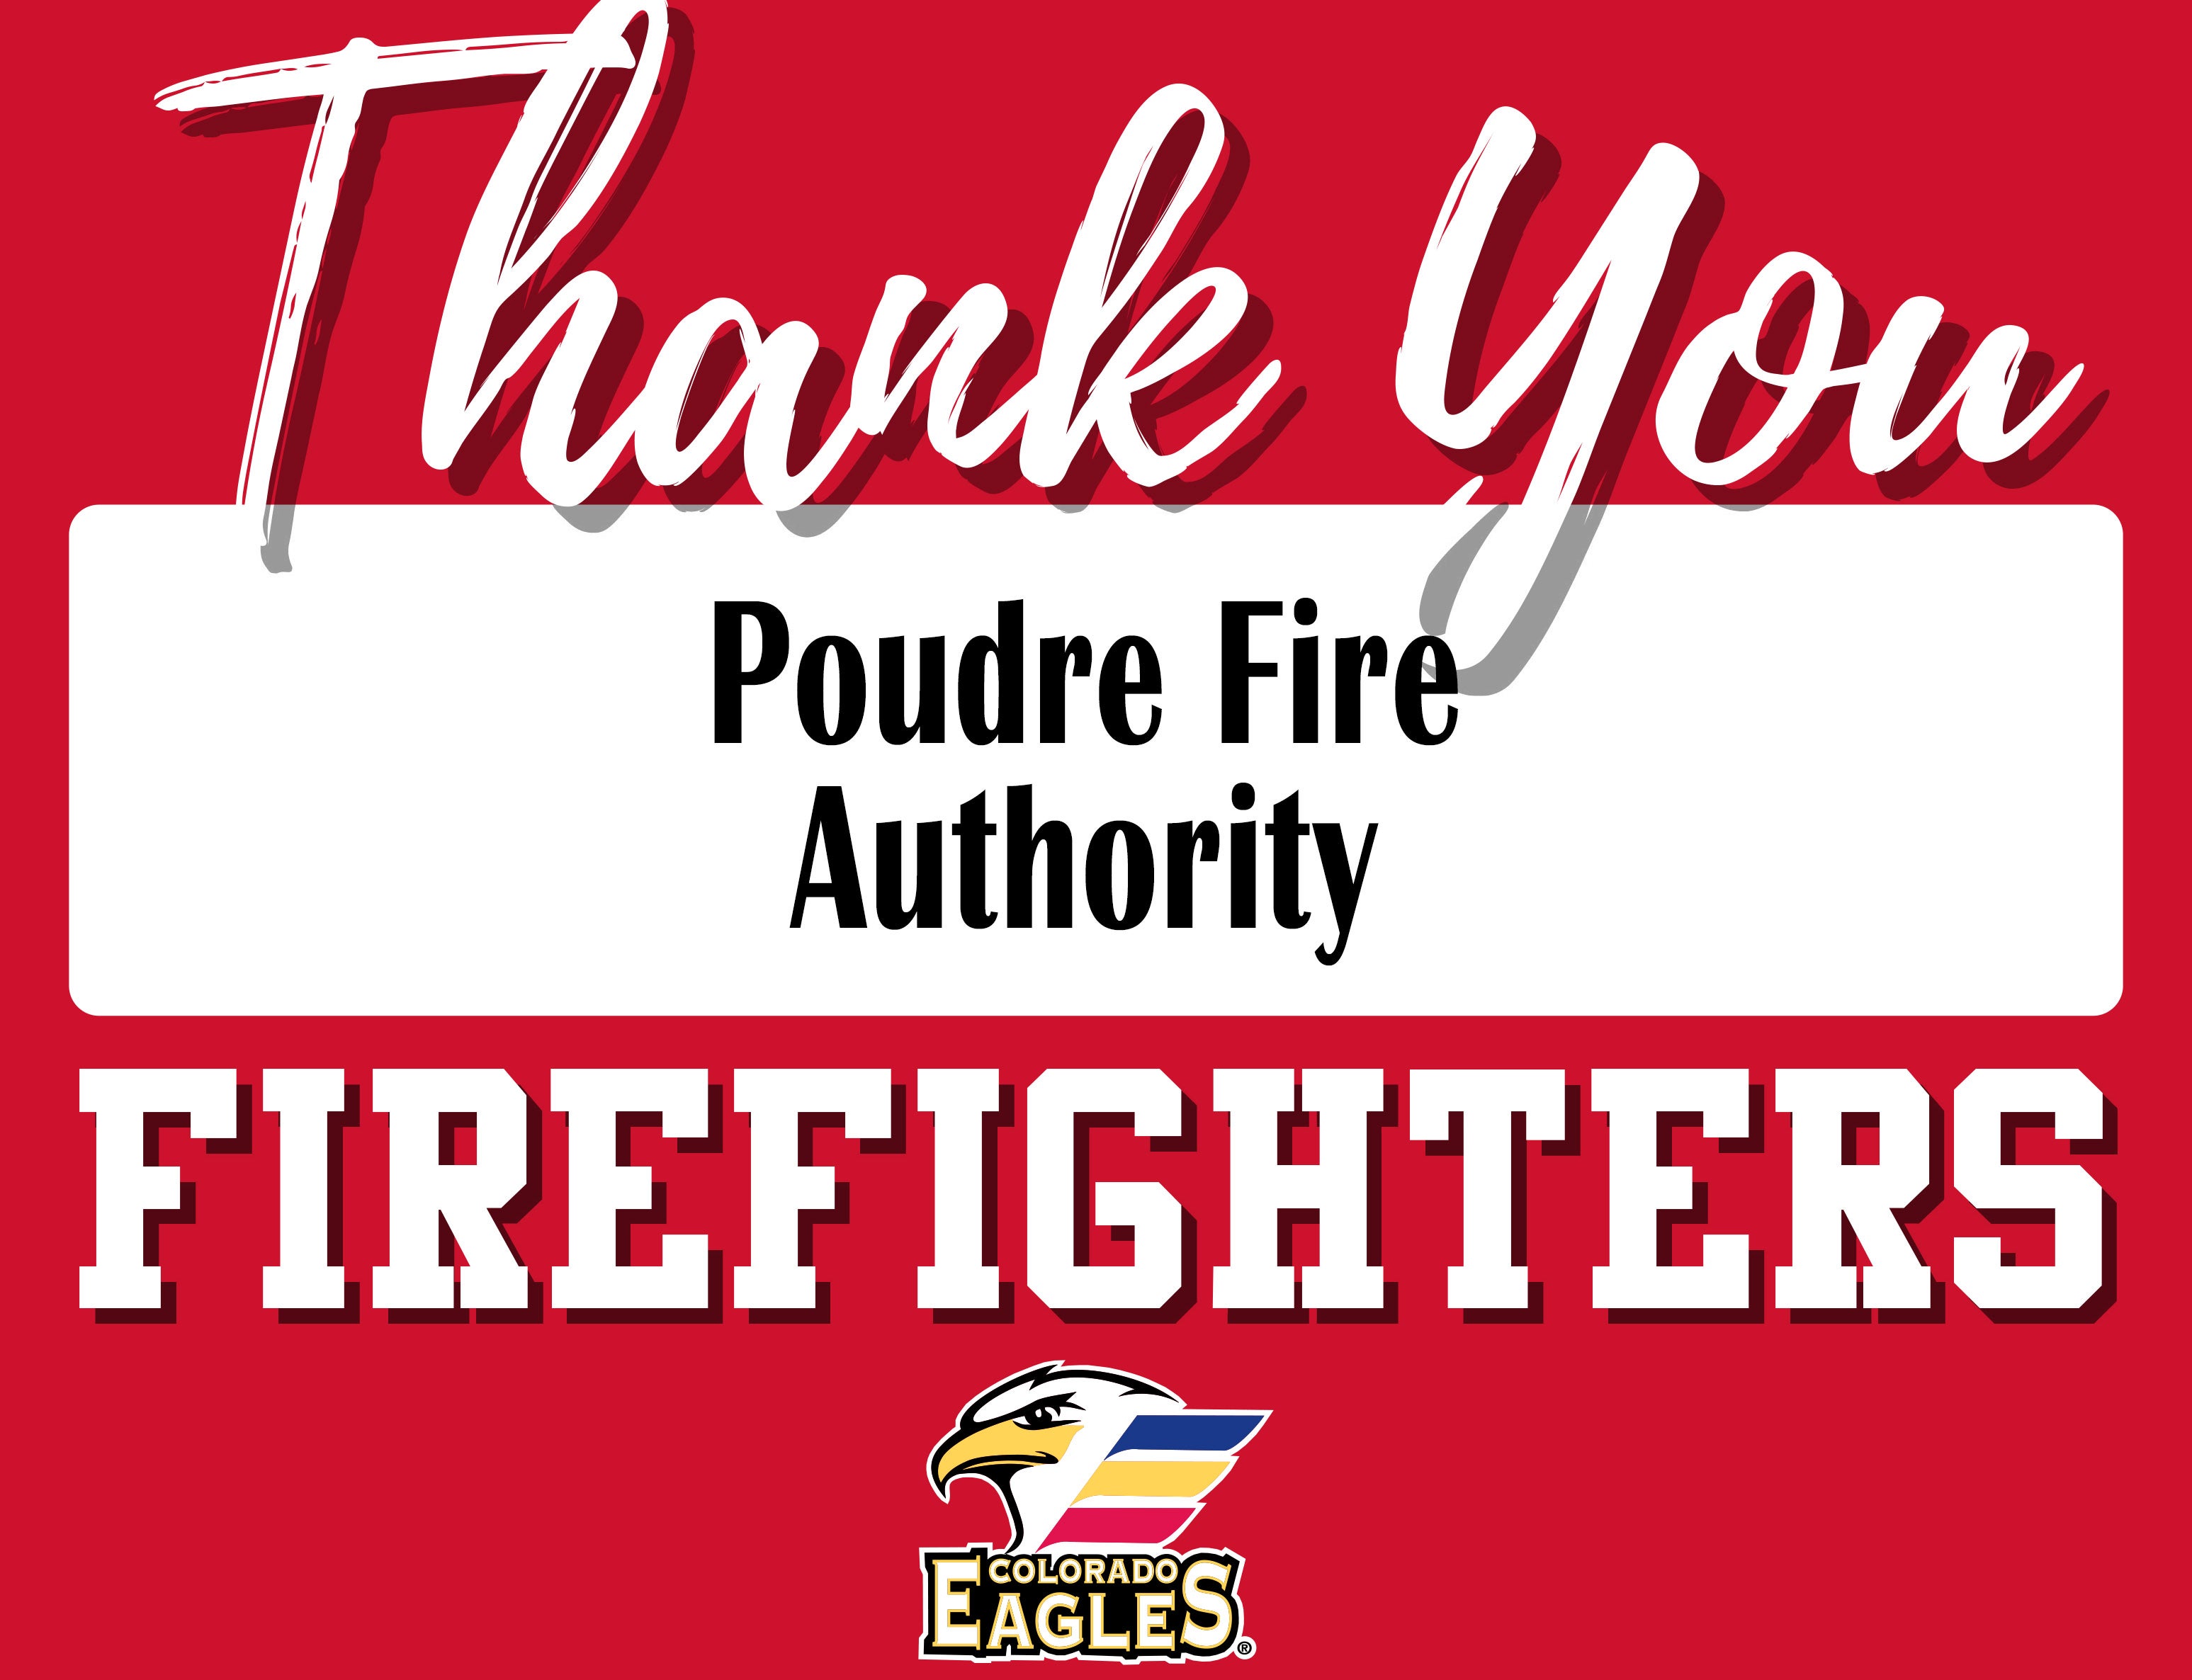 Thank You Firefighters Flyer-1.jpg